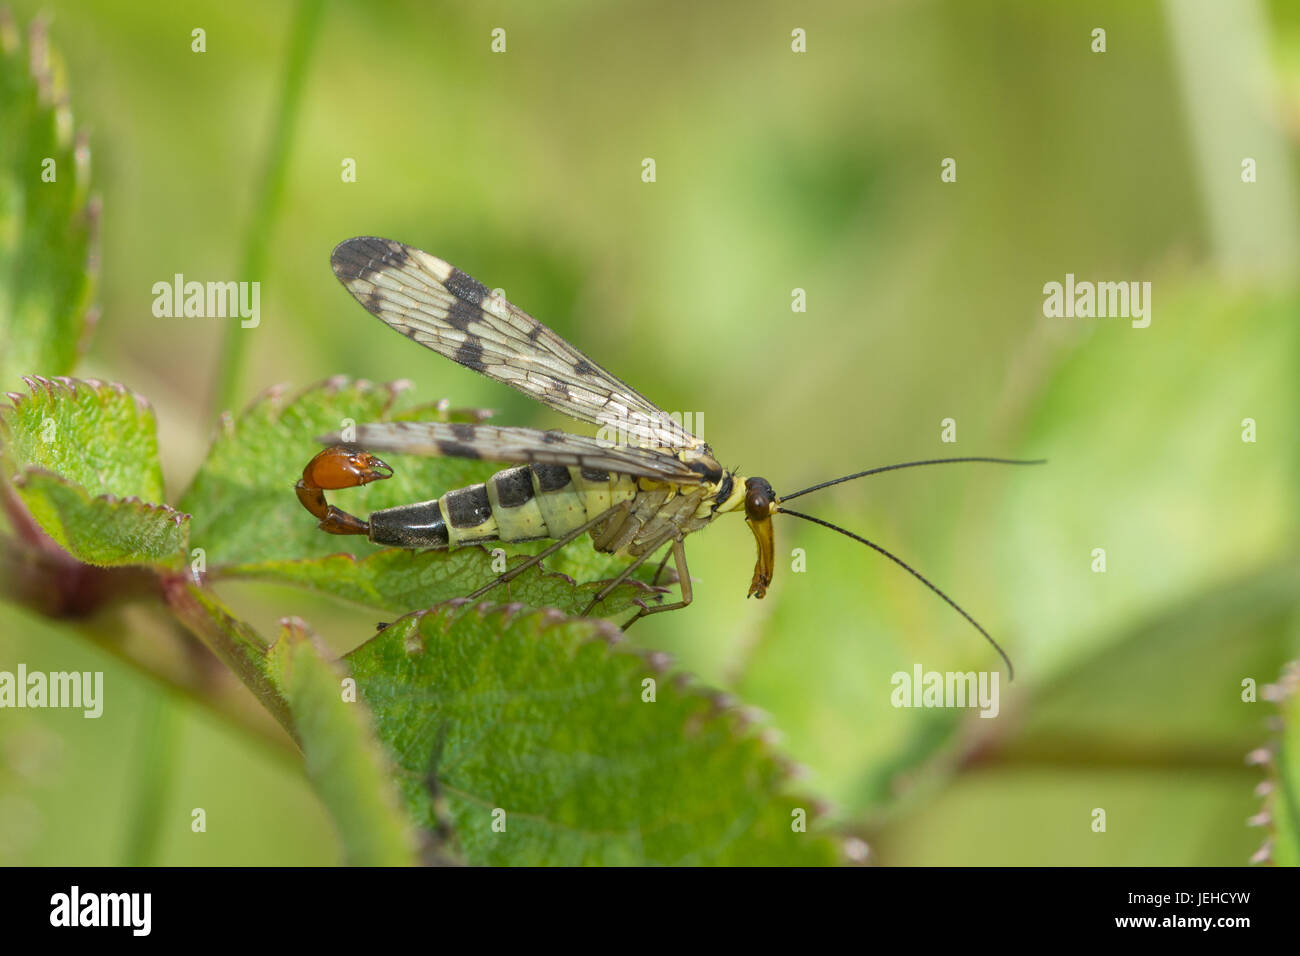 Close-up of scorpion fly (Panorpa species) Stock Photo